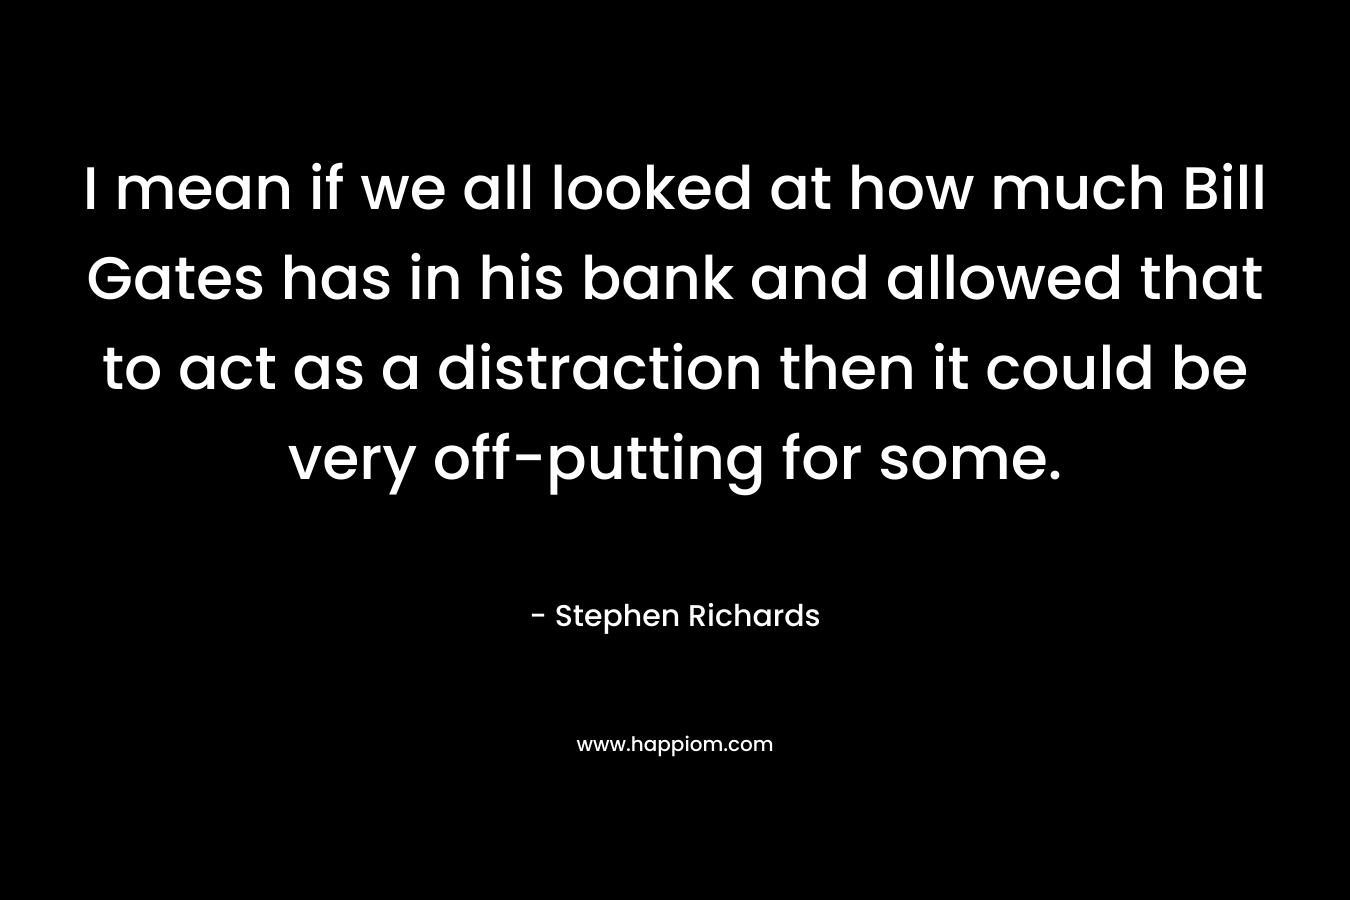 I mean if we all looked at how much Bill Gates has in his bank and allowed that to act as a distraction then it could be very off-putting for some. – Stephen Richards